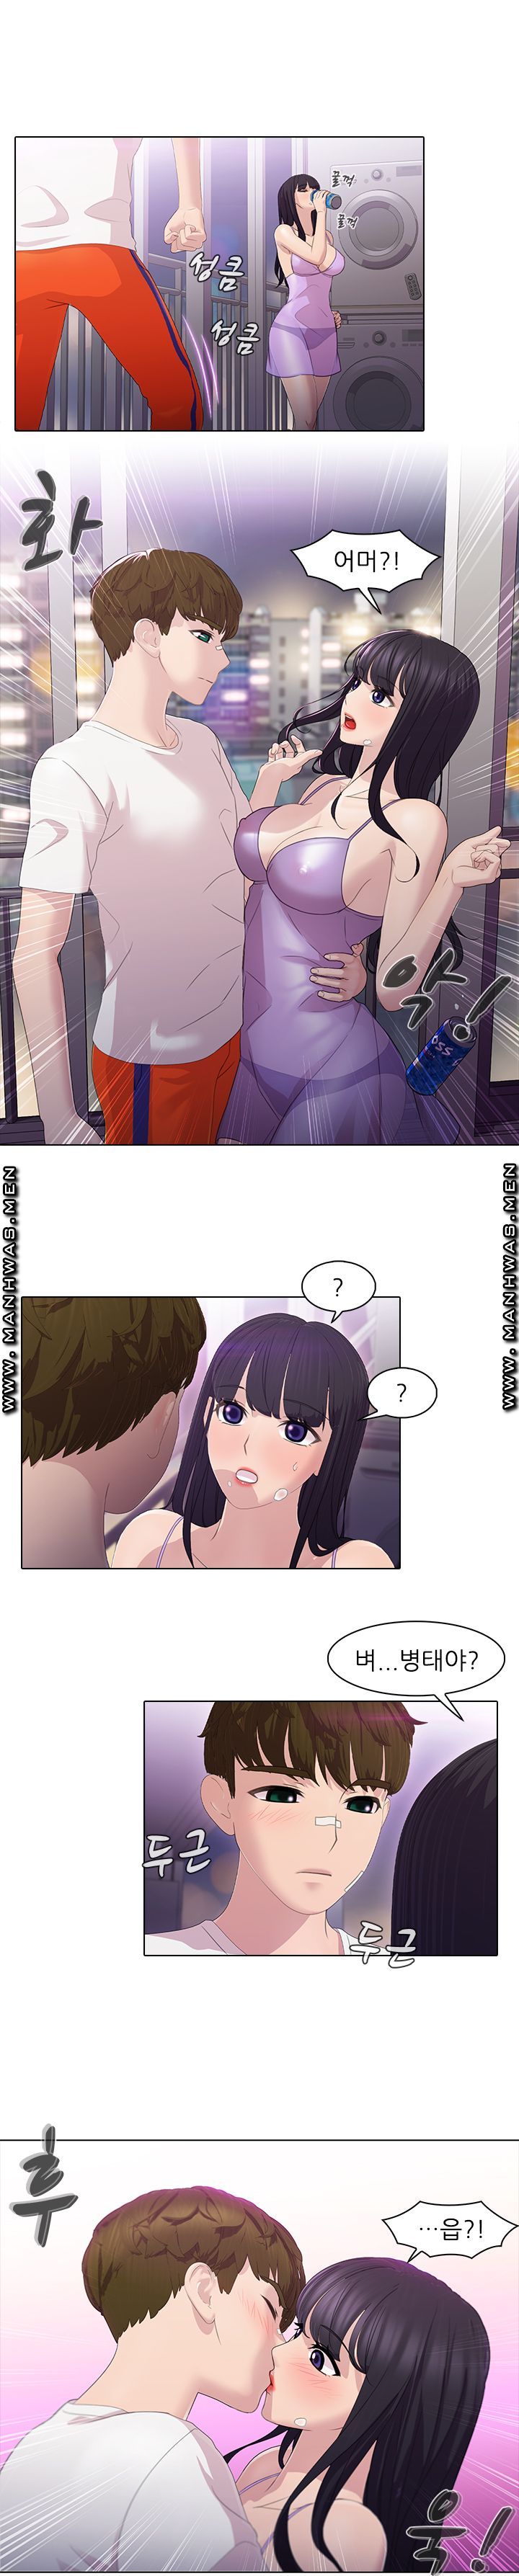 Sister's Friend Raw - Chapter 2 Page 7